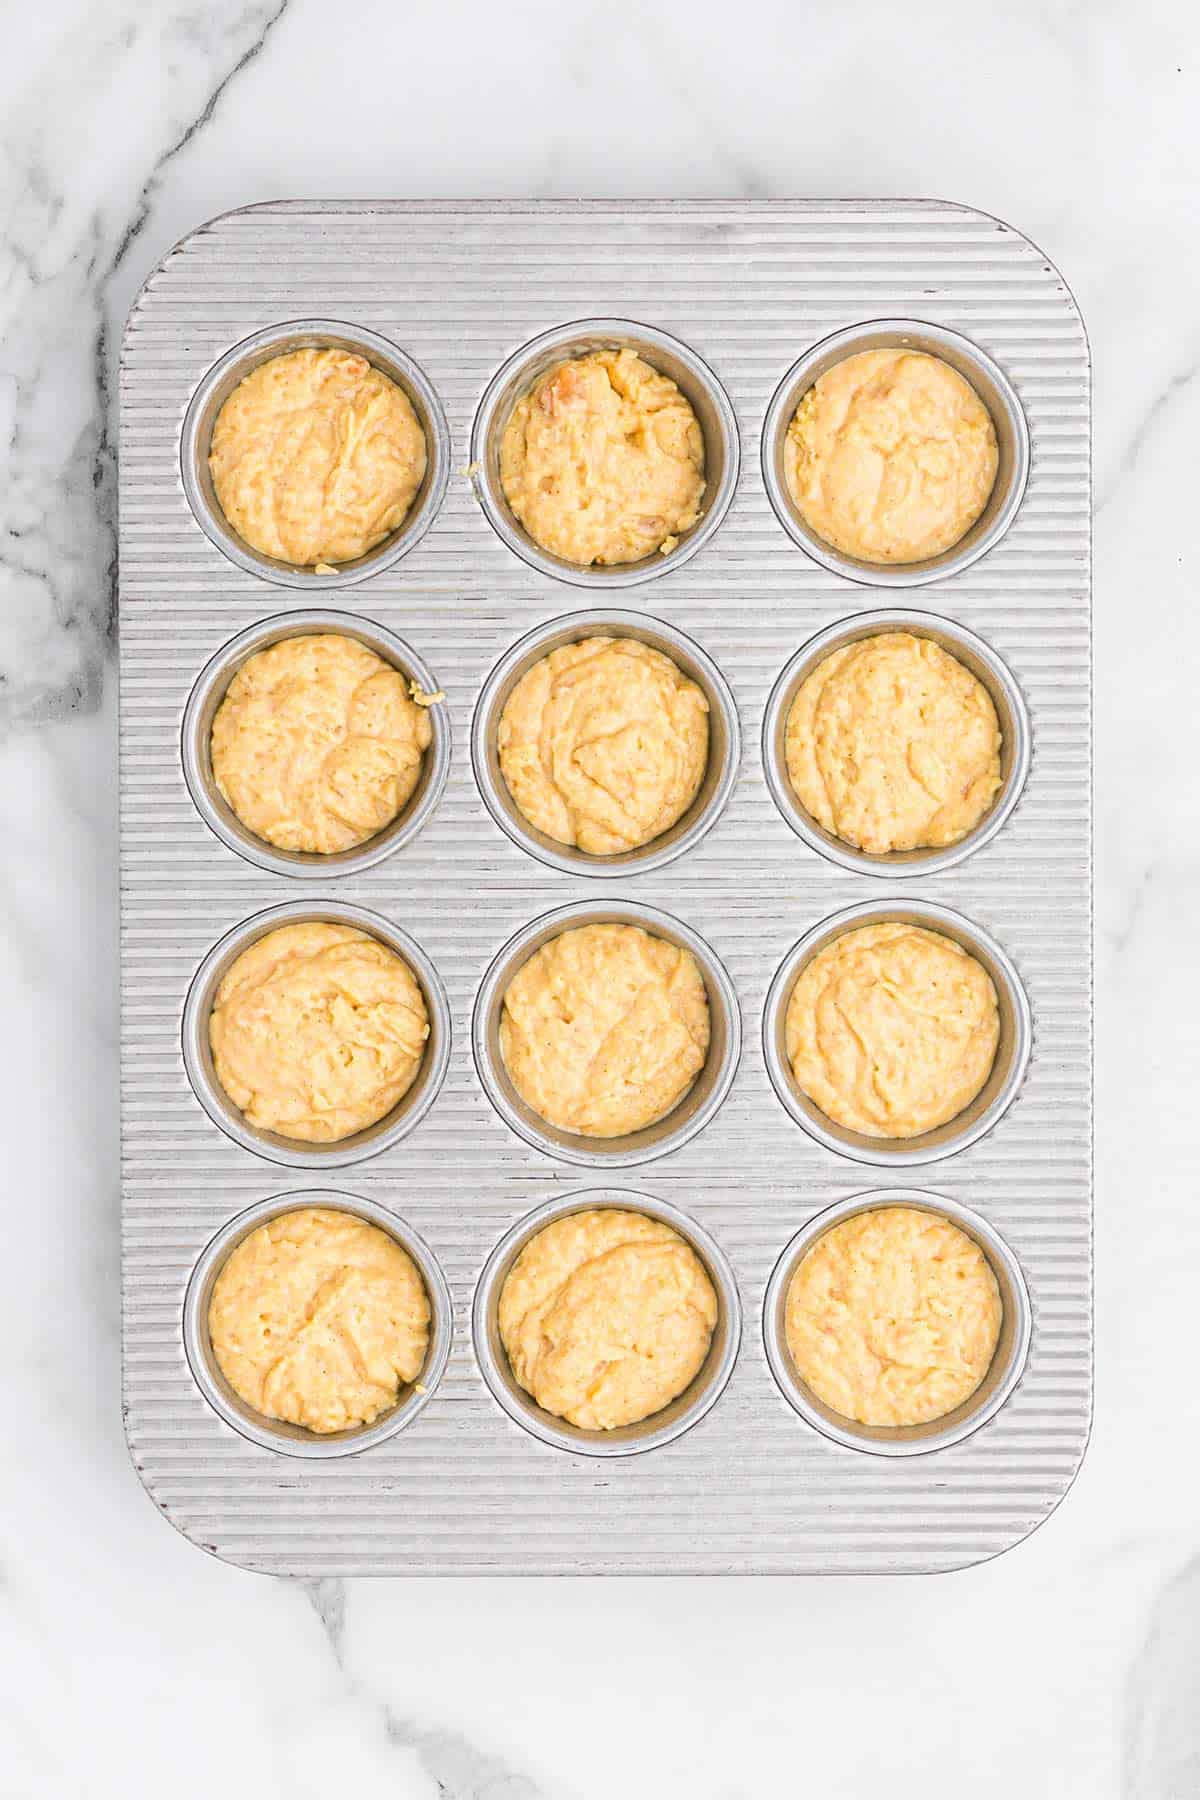 Batter poured into a muffin pan to bake.